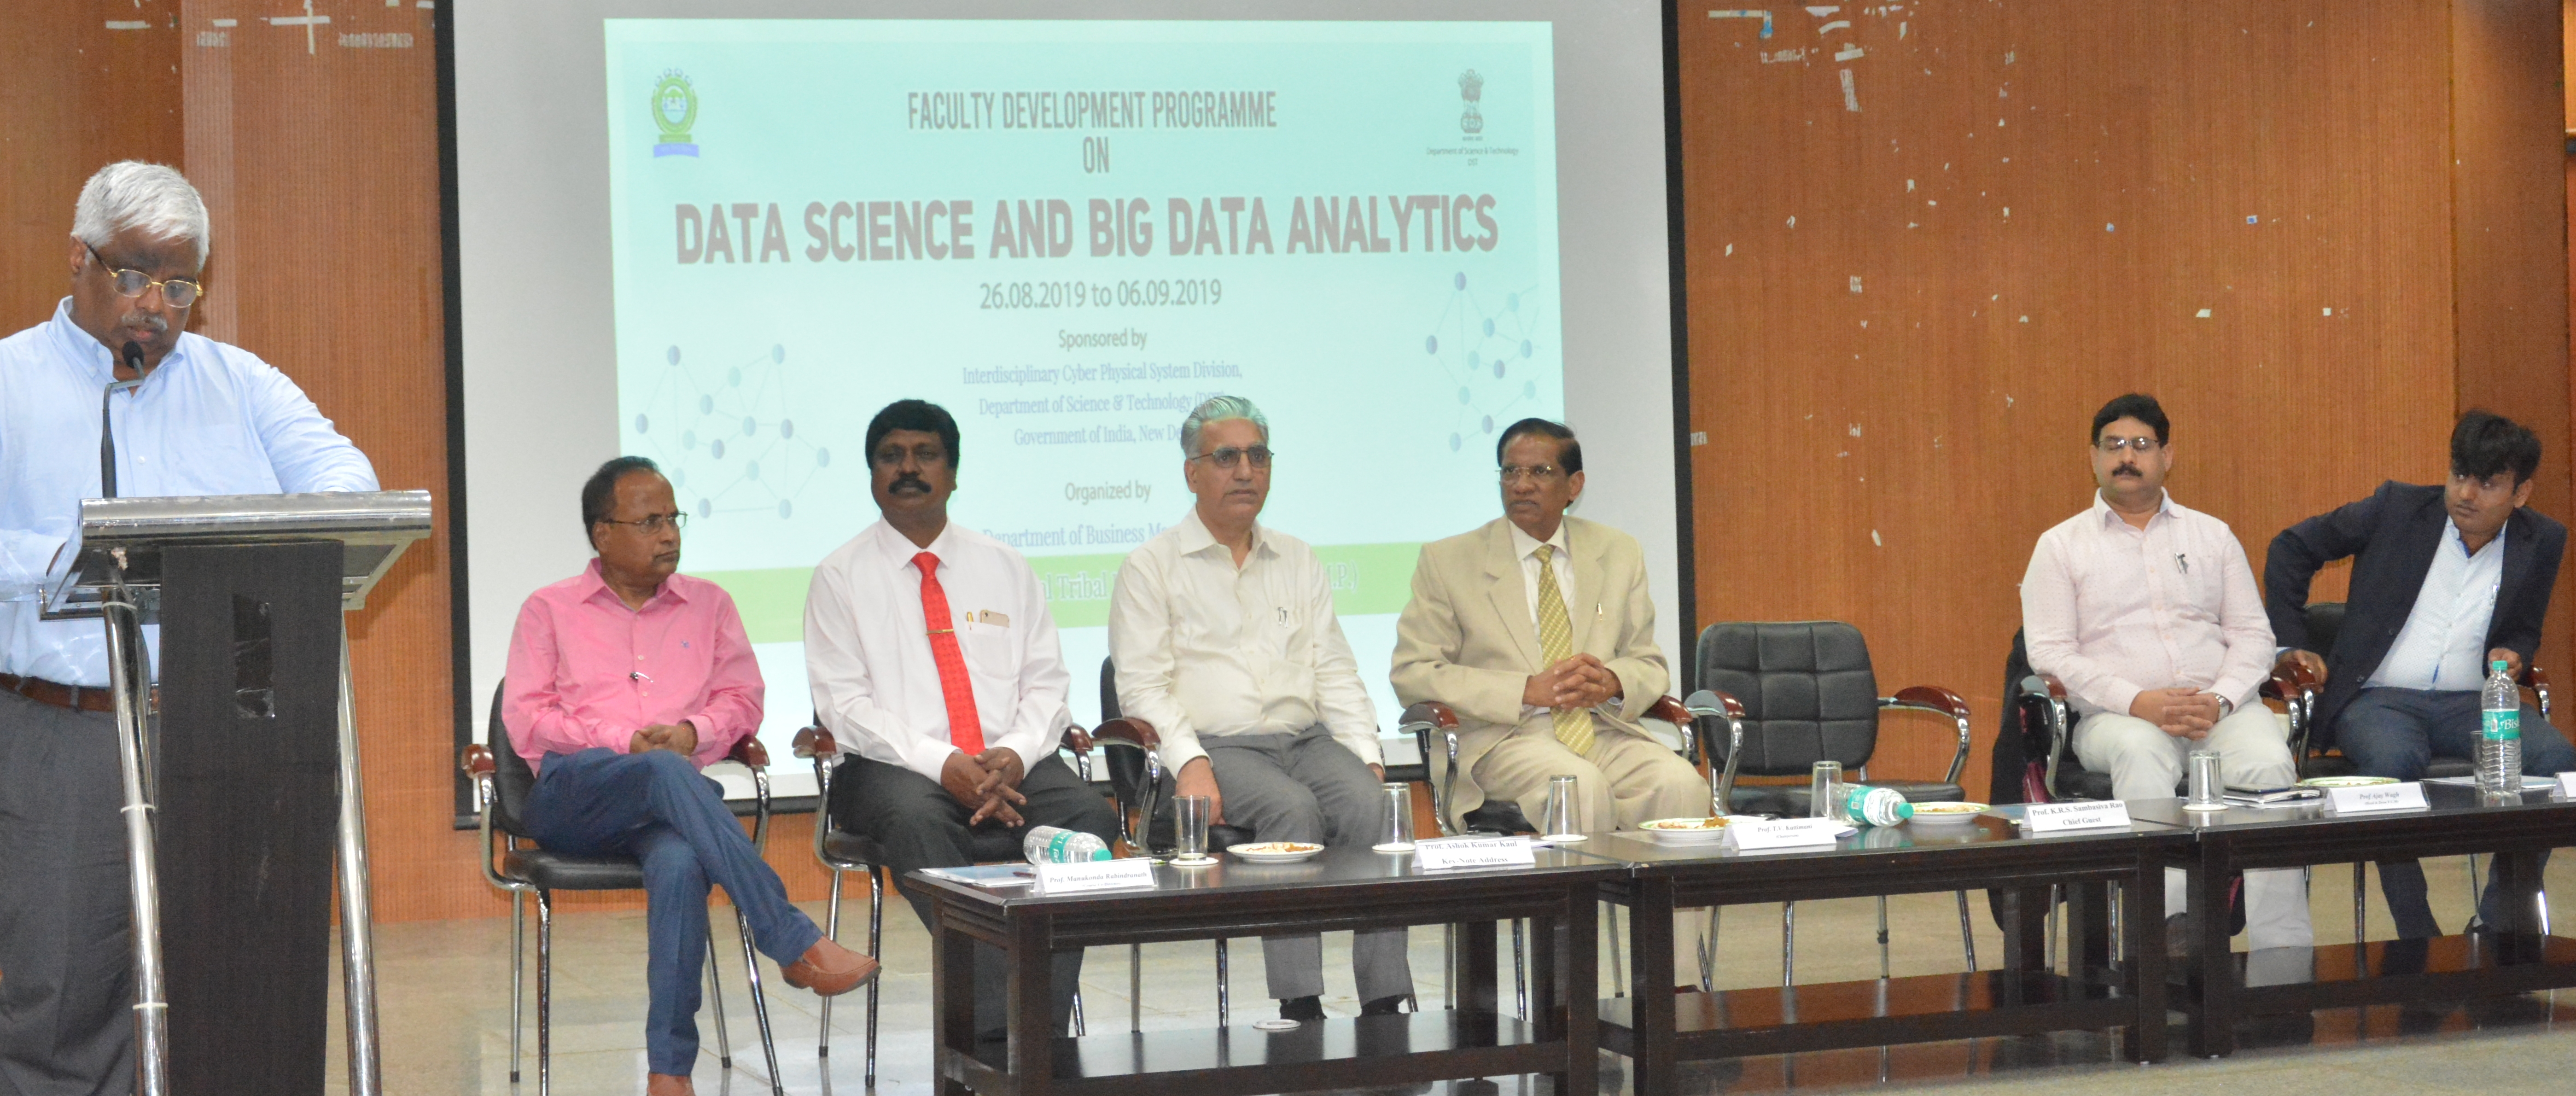 Training started on data science and big data analytics